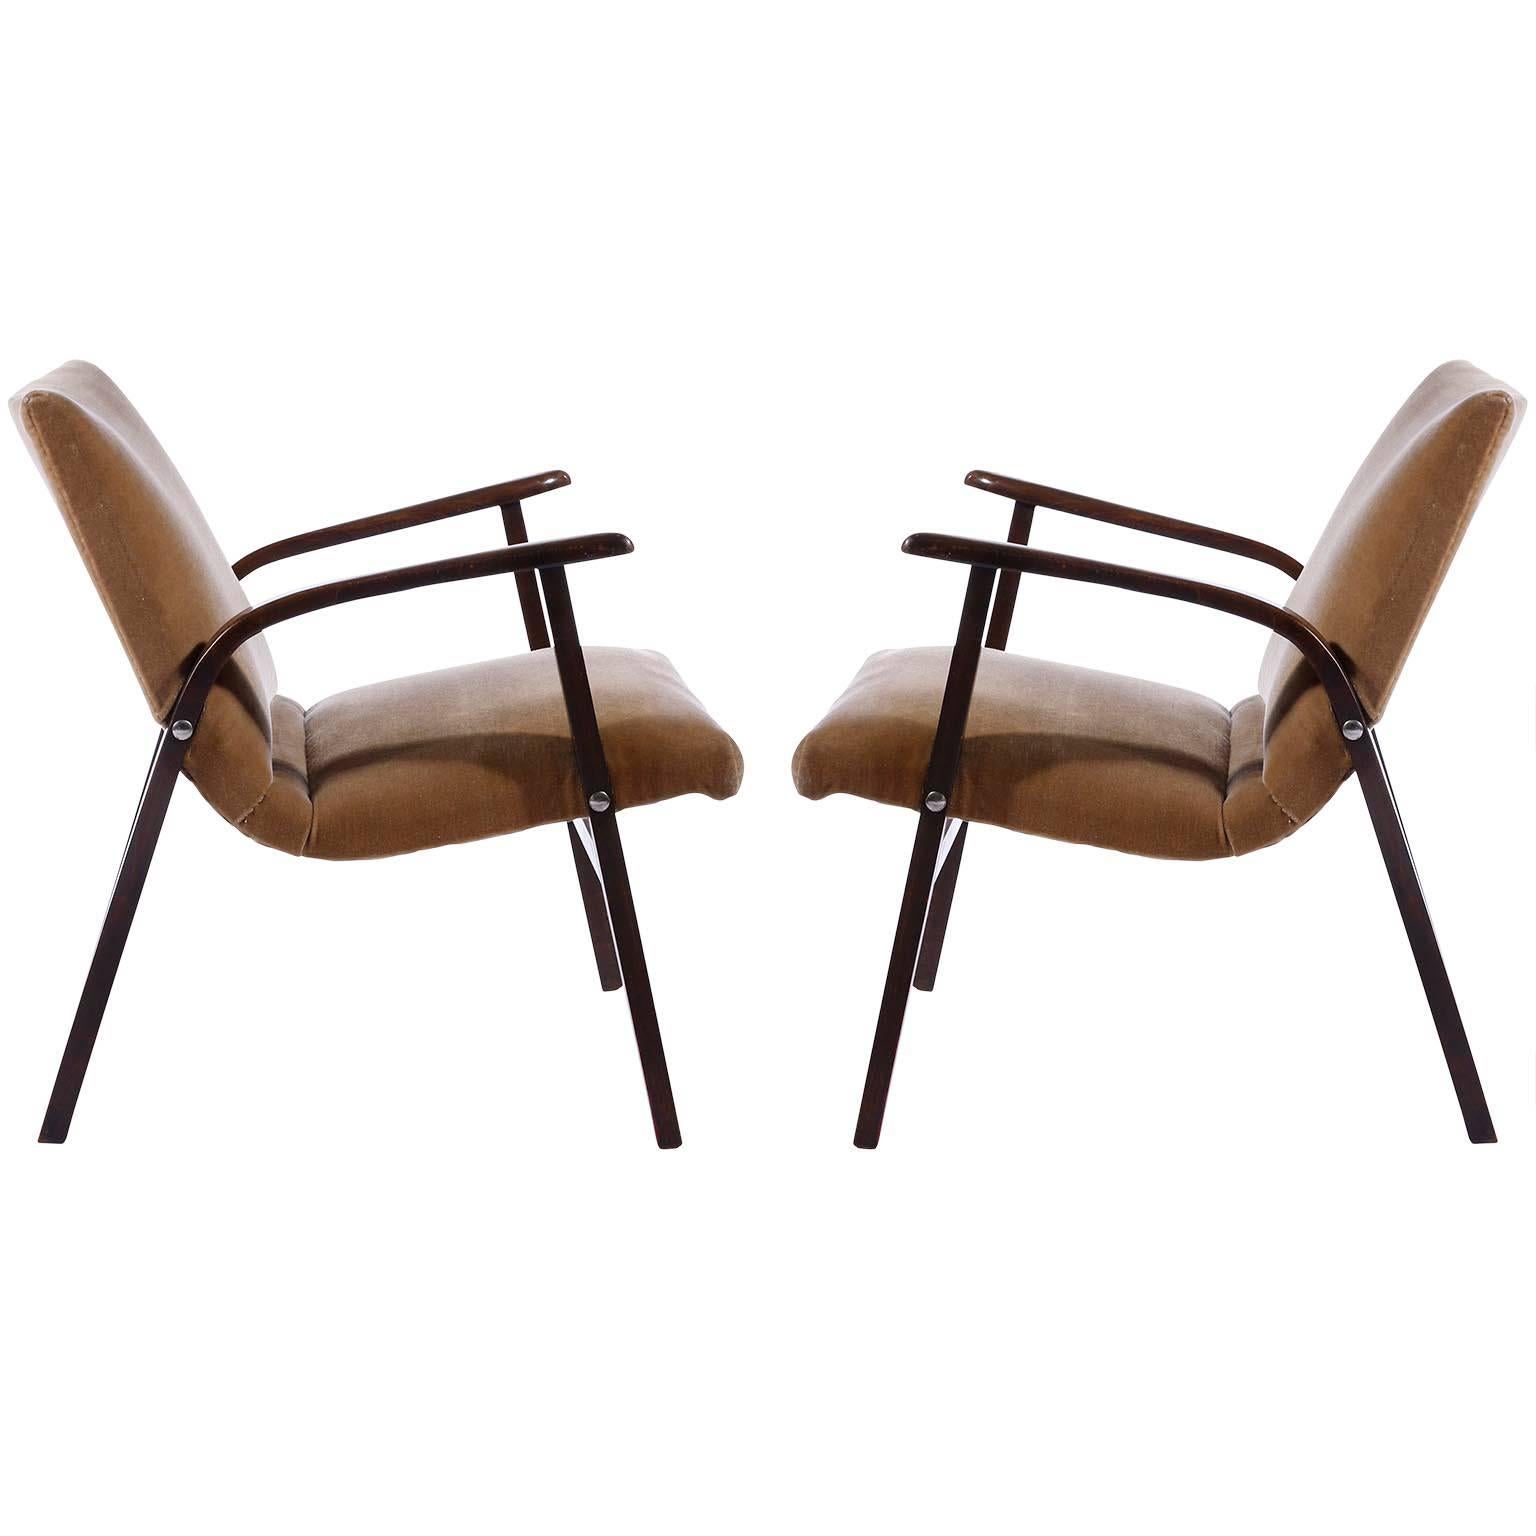 A pair of midcentury lounge chairs with organically curved armrests designed by Roland Rainer for the Cafe Ritter in Vienna, Austria, in 1952 and manufactured by Emil & Alfred Pollak.
The chairs are in very good condition. Most likely they were